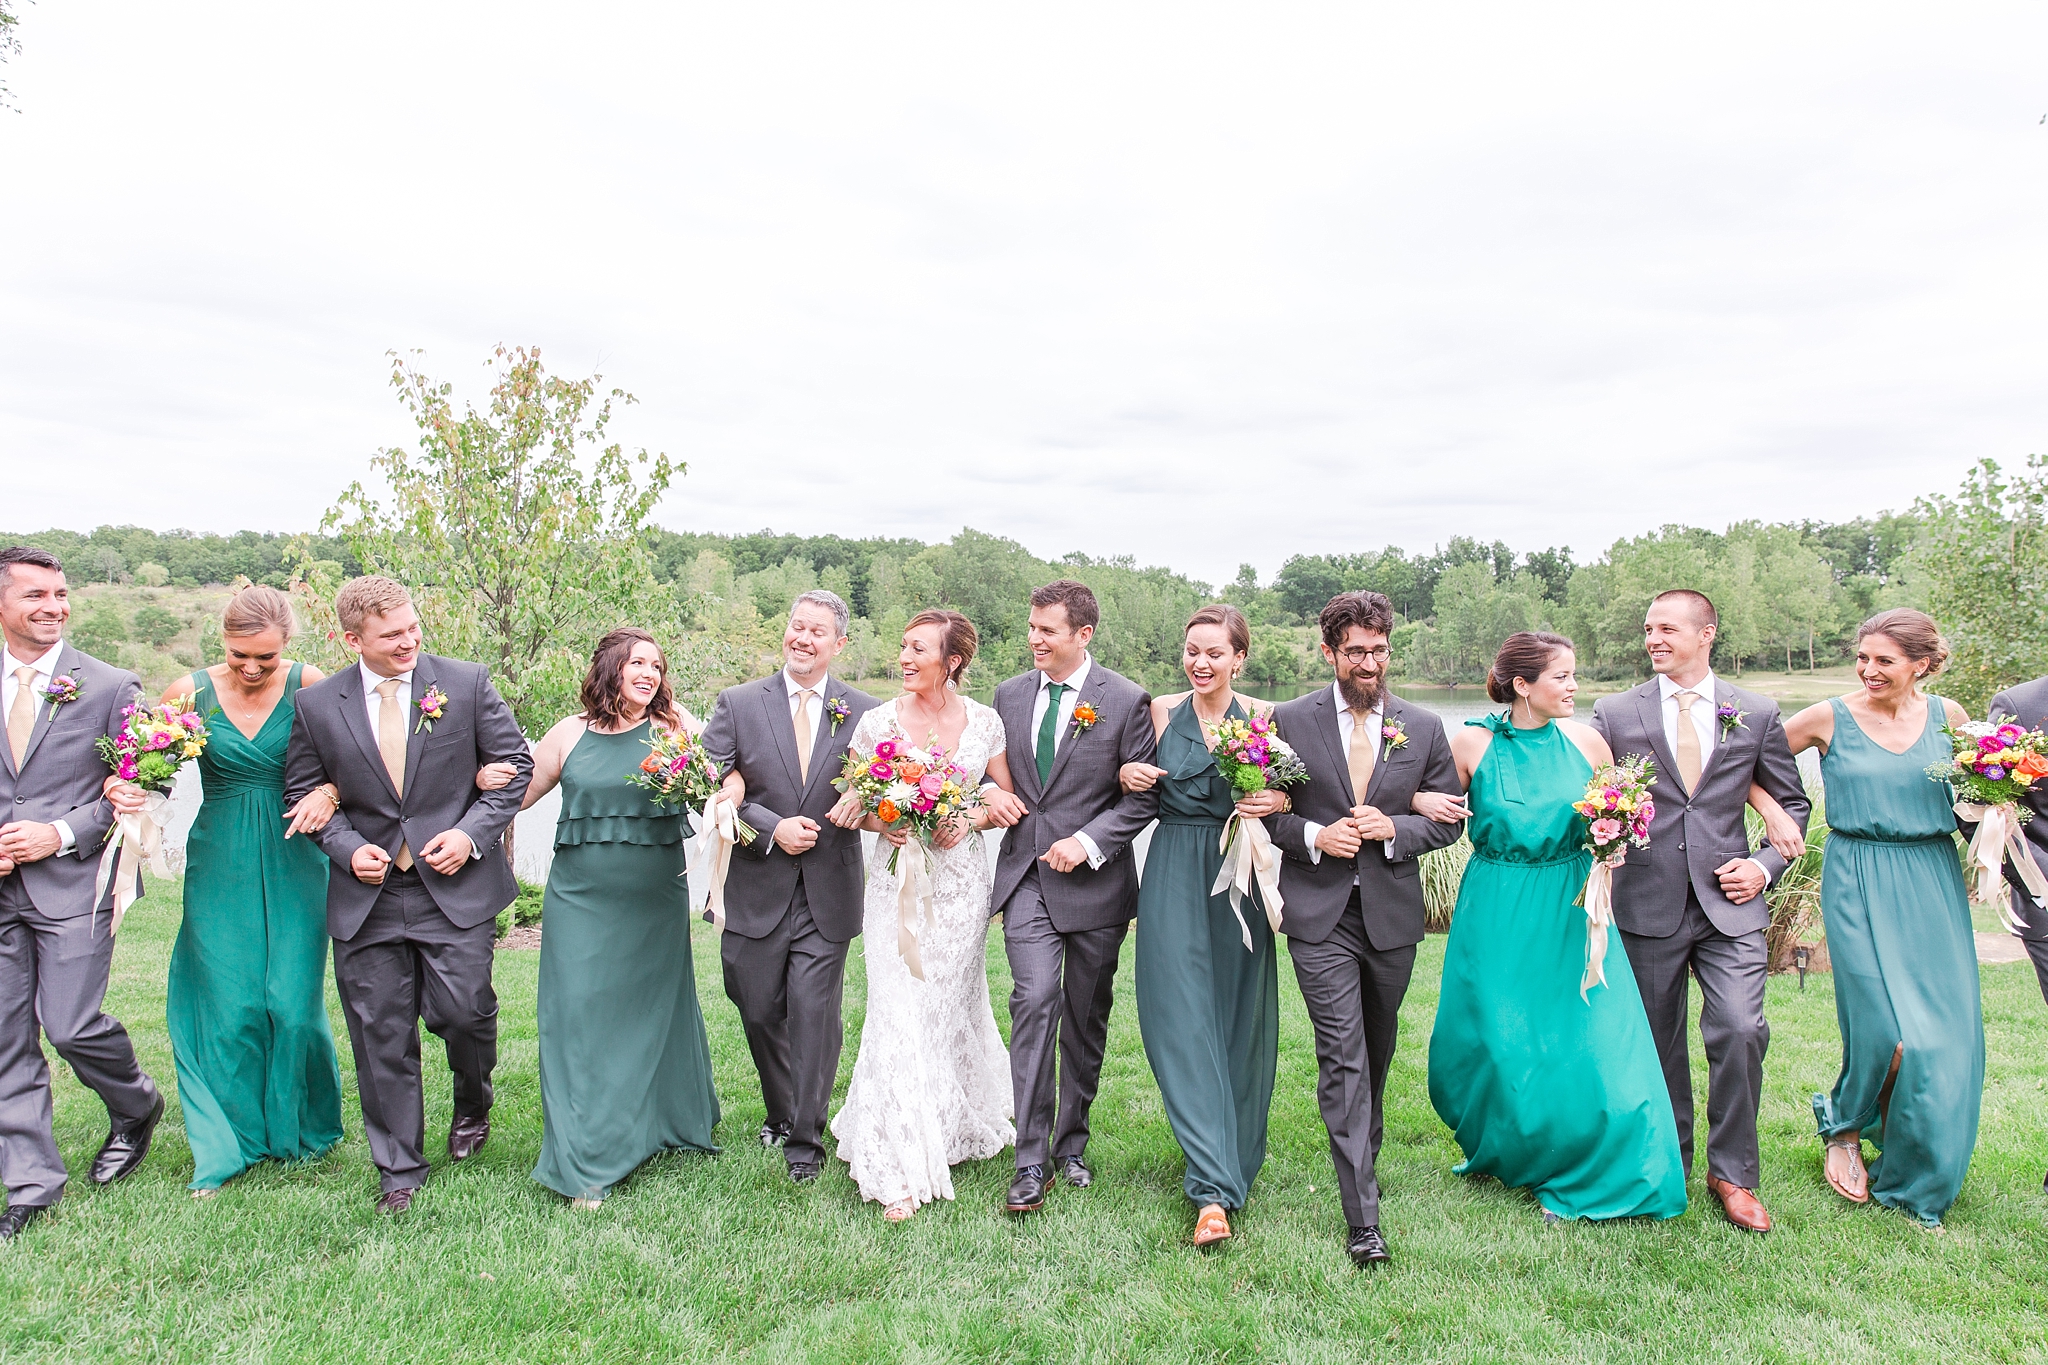 romantic-artful-candid-wedding-photos-in-detroit-lansing-ann-arbor-northern-michigan-and-chicago-by-courtney-carolyn-photography_0025.jpg